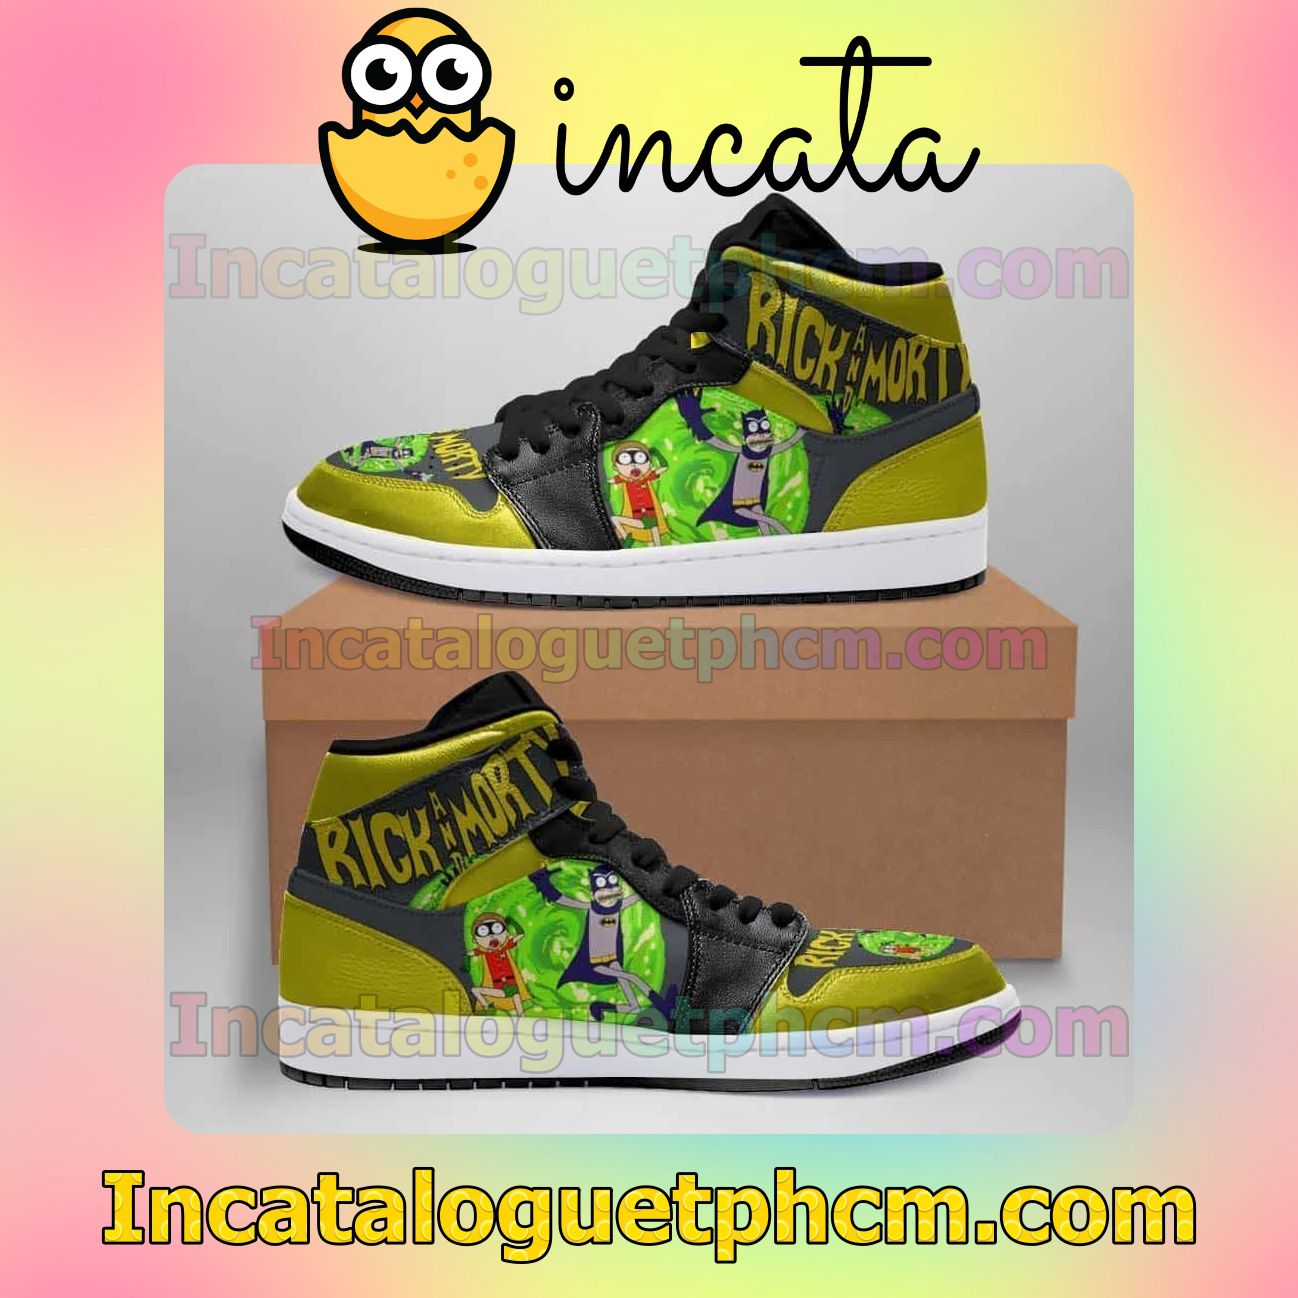 Cheap Yellow Rick And Morty 1s Air Jordan 1 Inspired Shoes